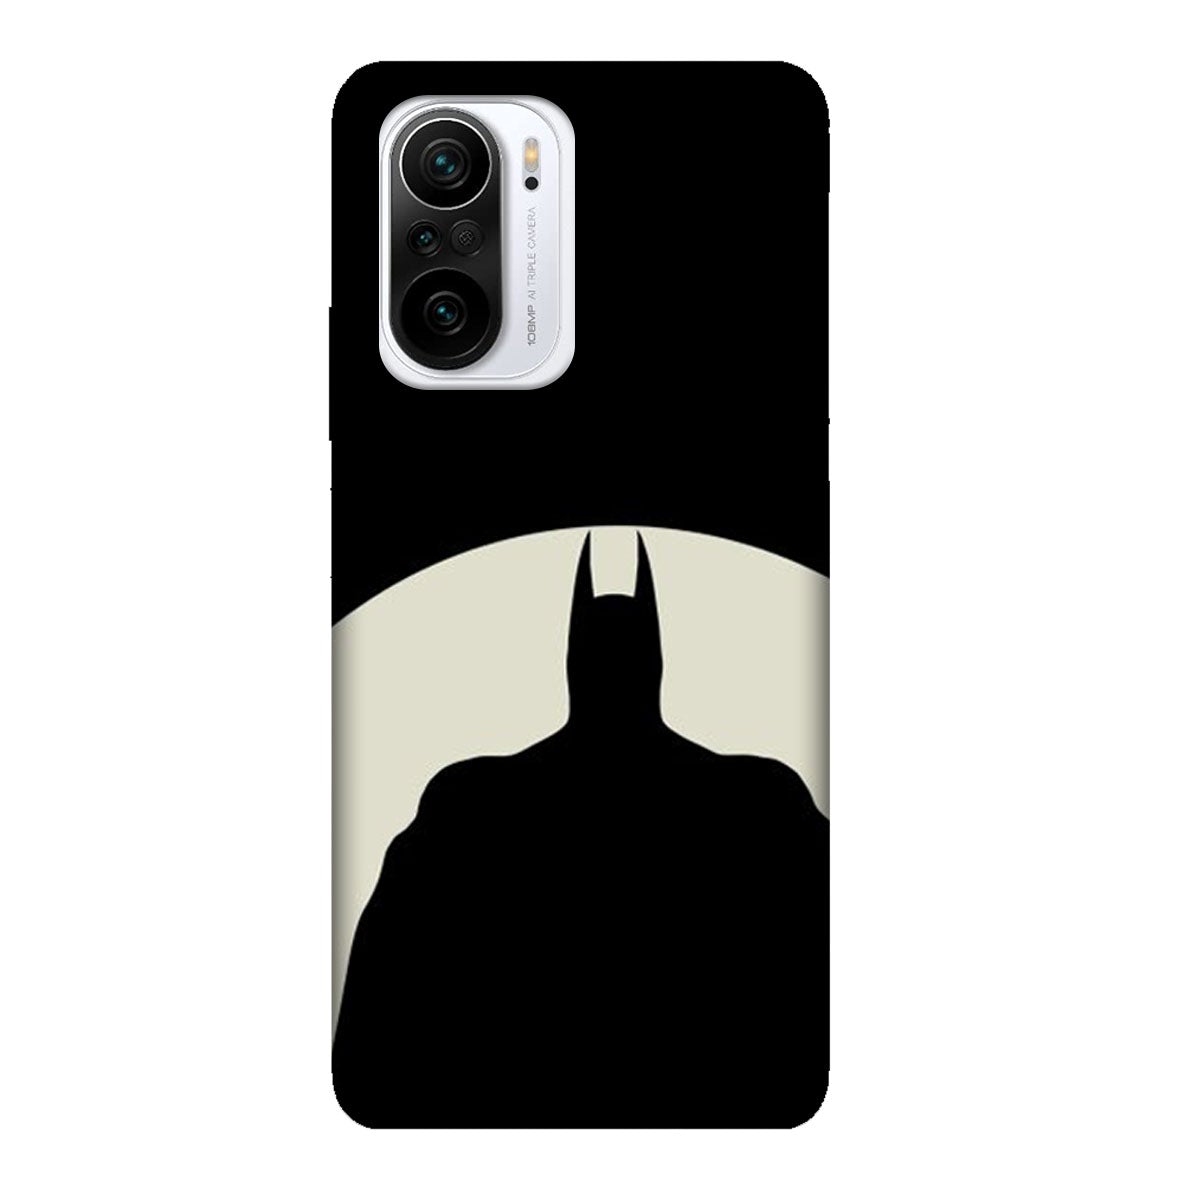 Batman - In the Moon - Mobile Phone Cover - Hard Case